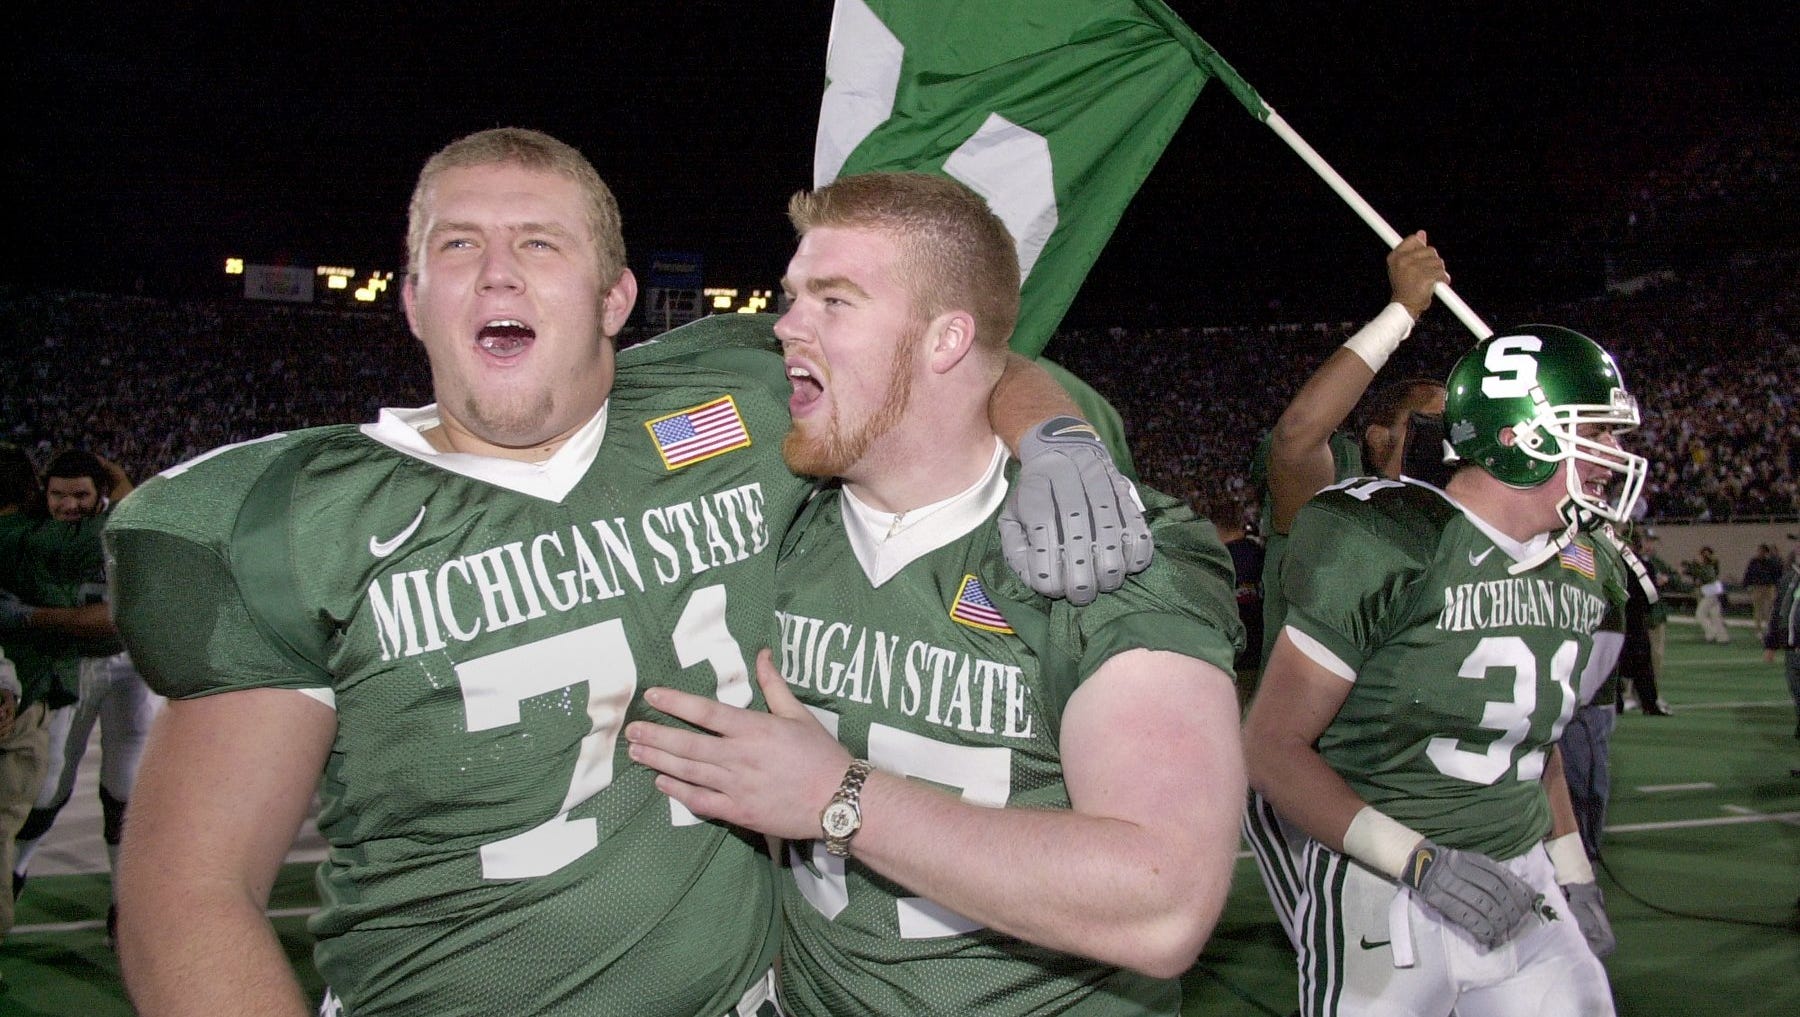 Who wore it best' at Michigan State: No. 71